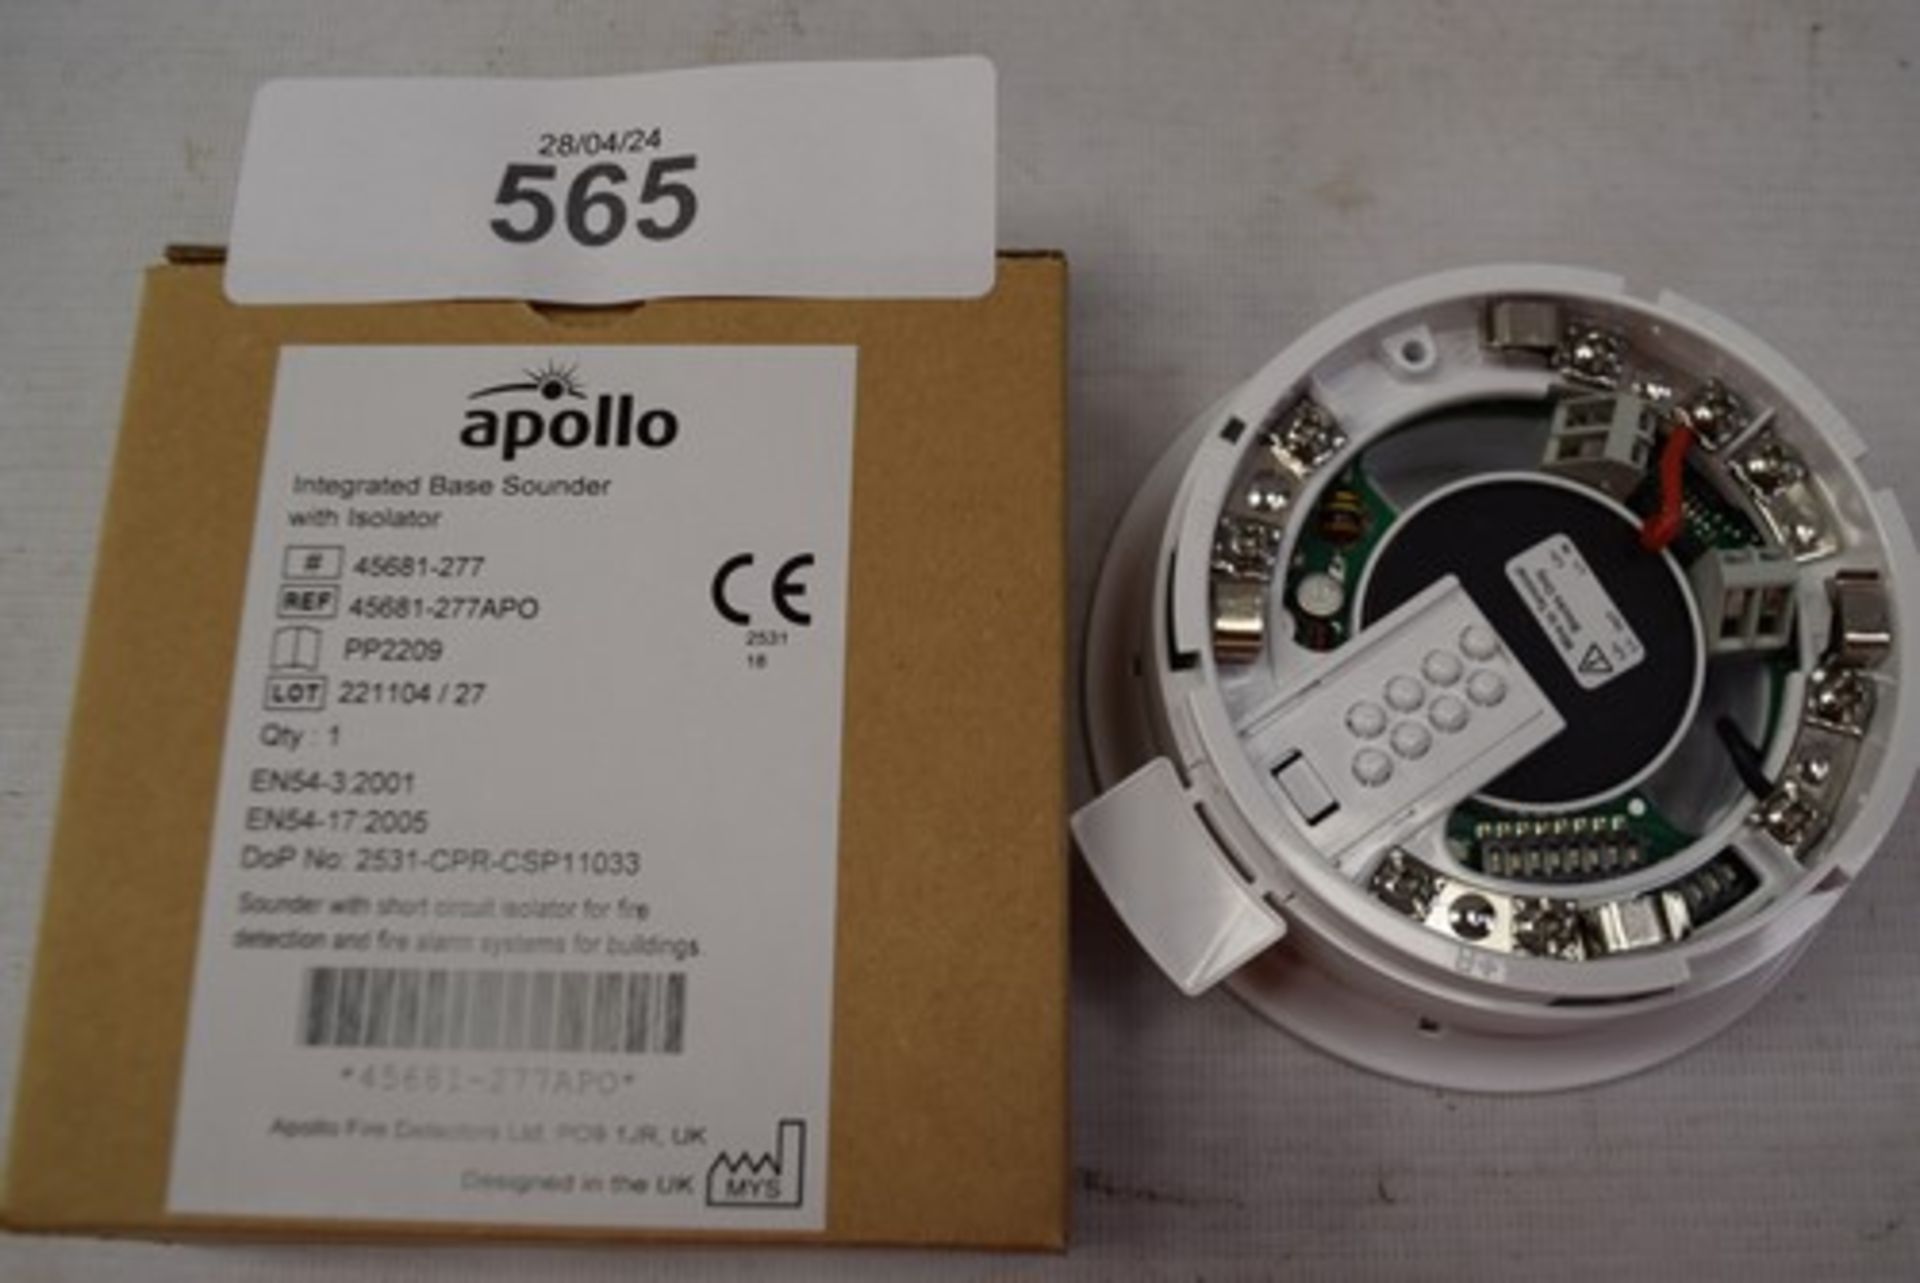 12 x Apollo integrated base sounders with isolators, Ref:- 45681-277APO - new in box (GS5) - Image 2 of 2